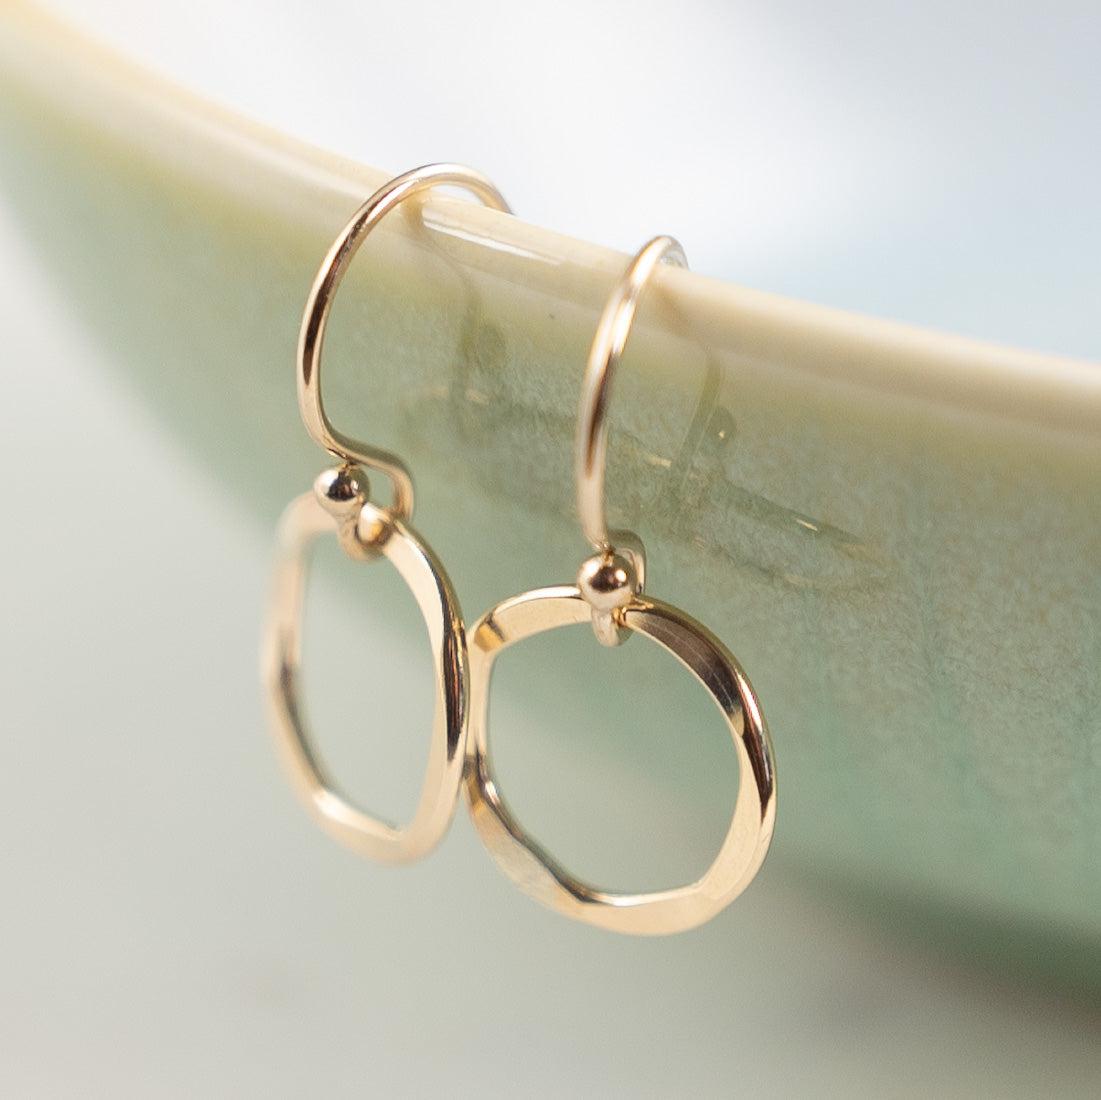 Small gold filled drop earrings with rippled design